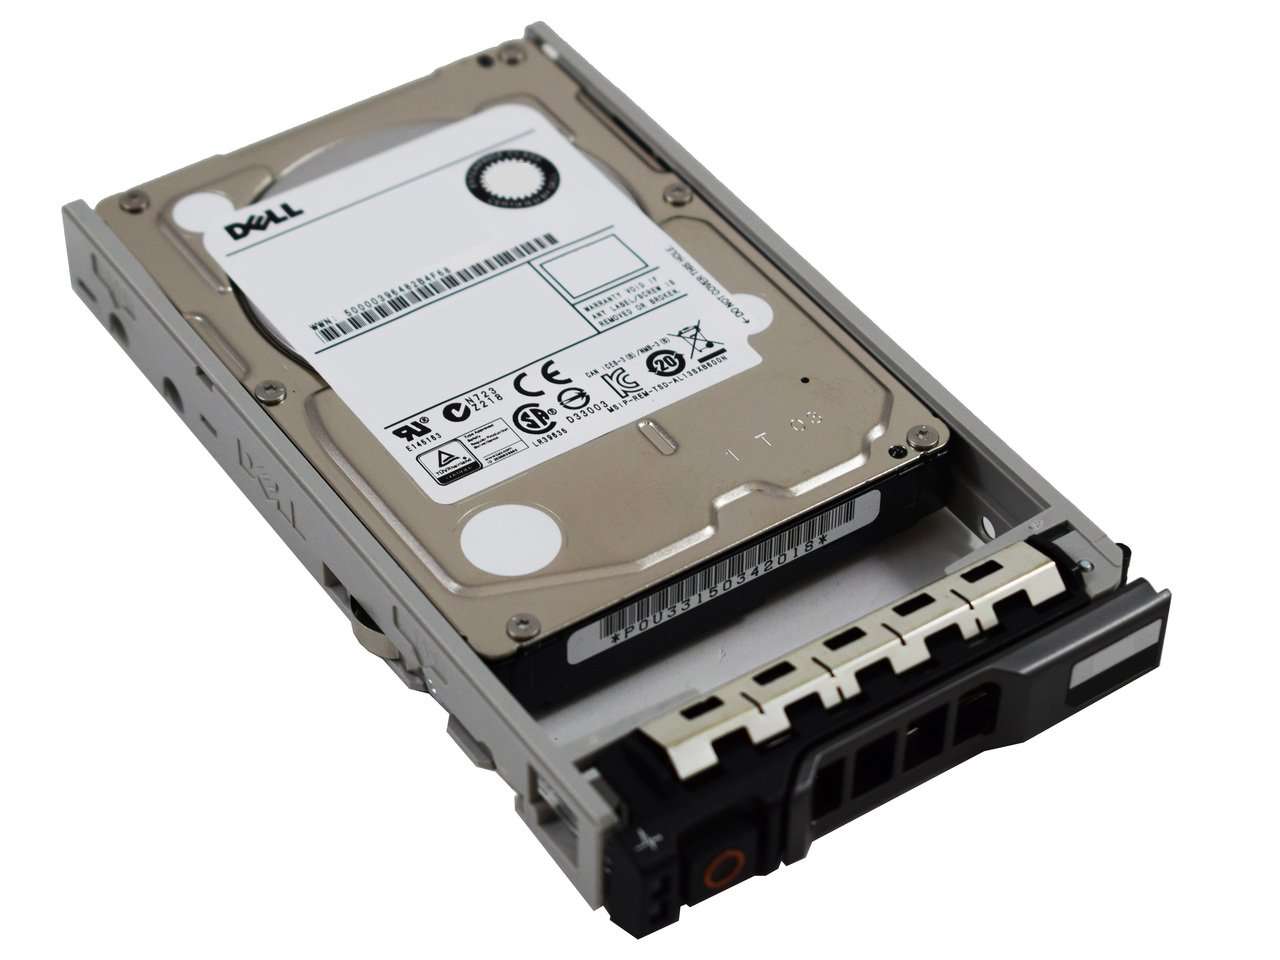 Dell G13 0T4VYF 600GB 10K RPM SAS 6Gb/s 512n 2.5" Manufacturer Recertified HDD